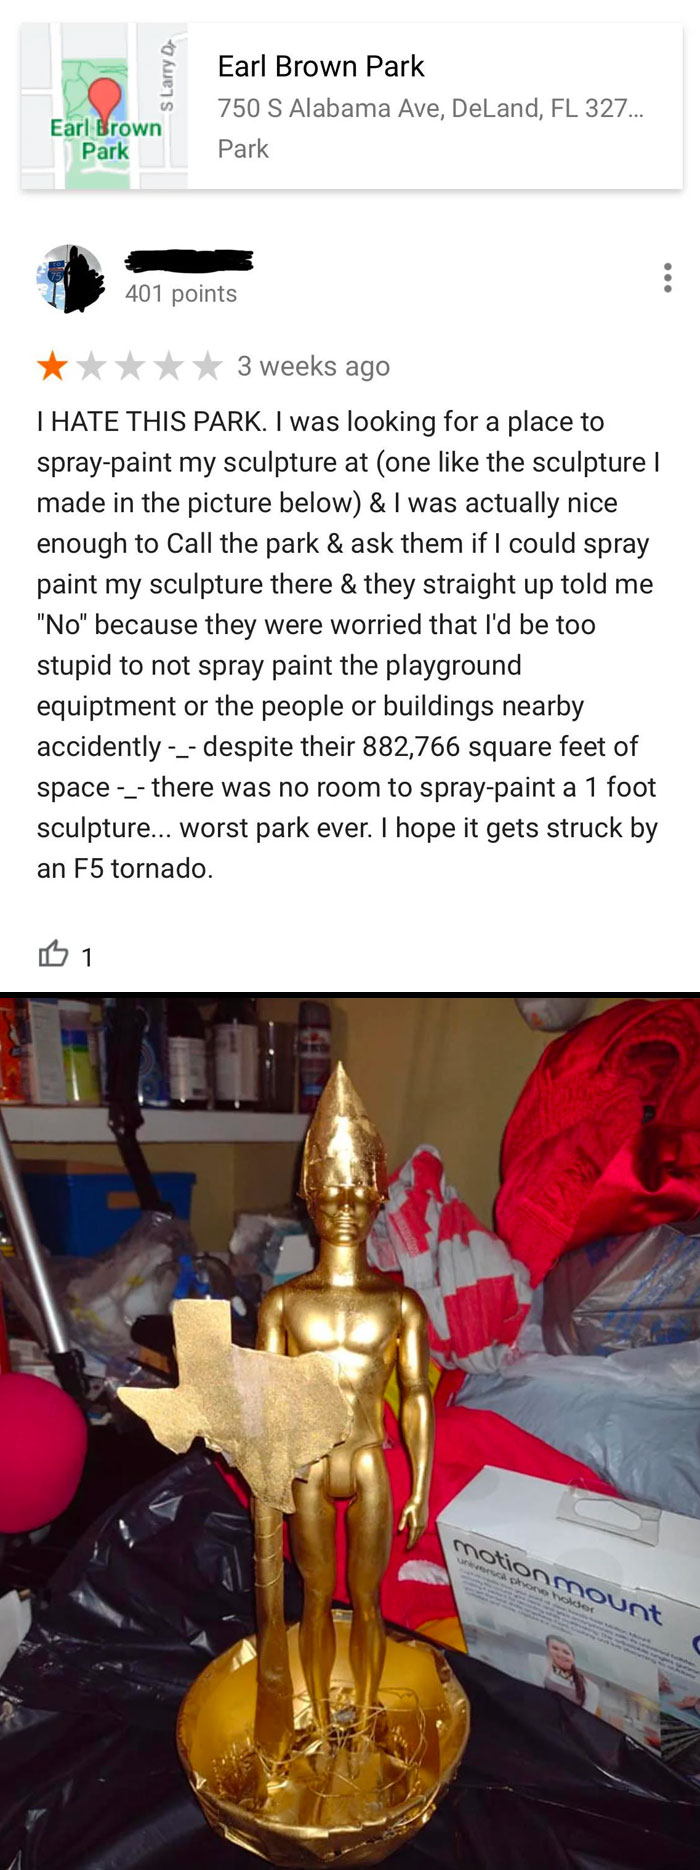 I Can’t Spray Paint My “Sculpture” In A Public Park? I Hope You Get Hit By A Tornado